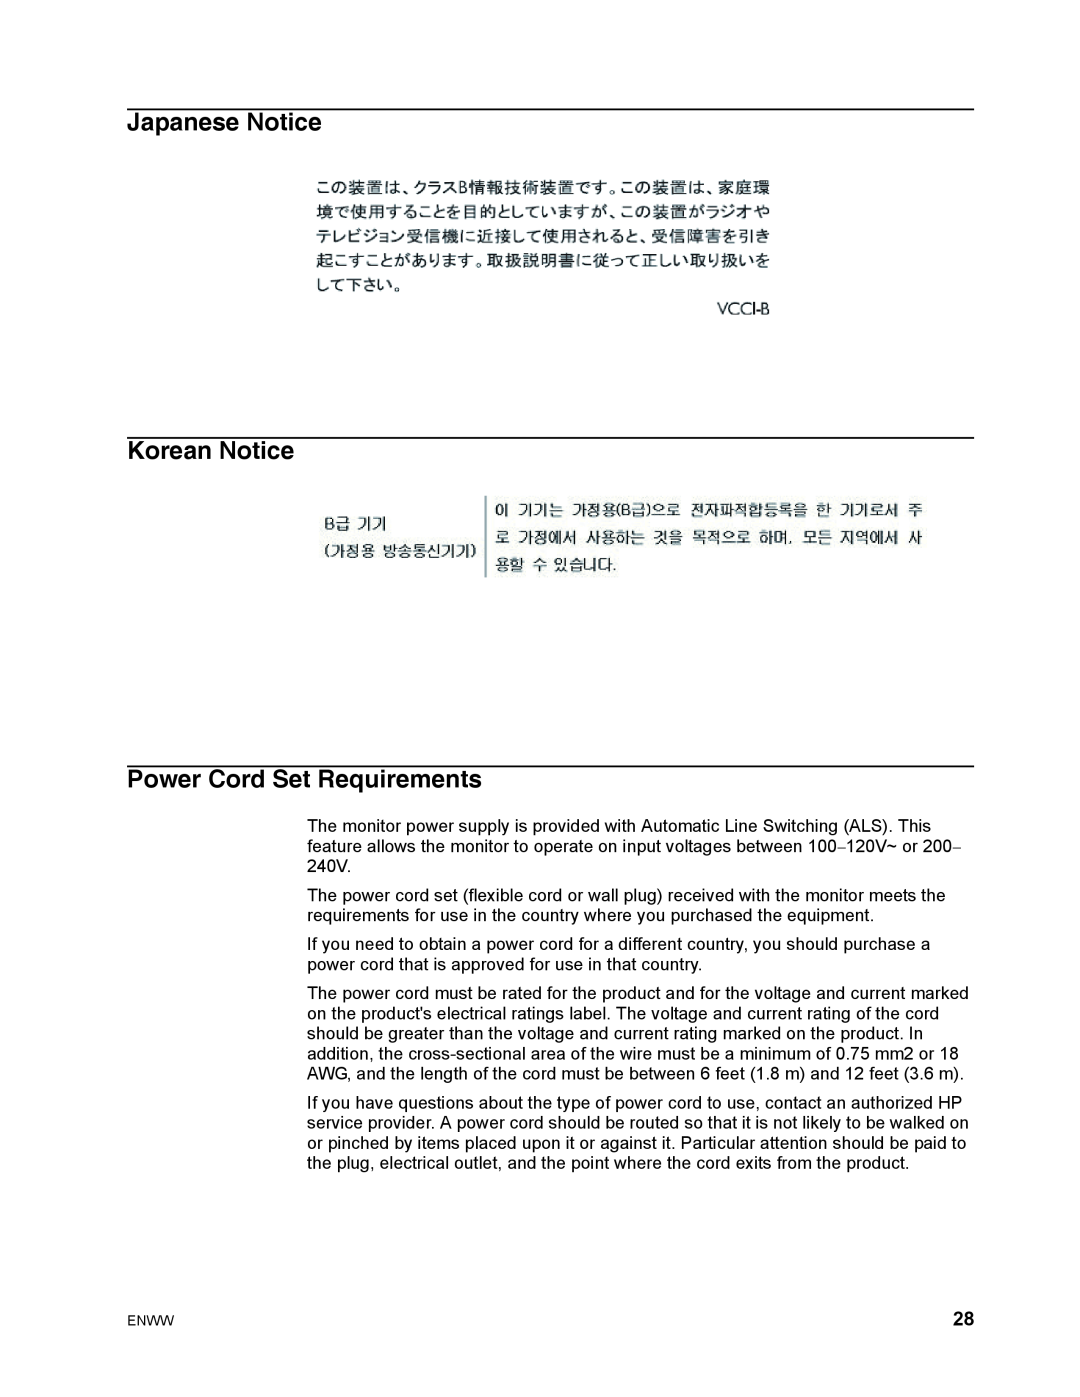 HP S1922 manual Japanese Notice Korean Notice Power Cord Set Requirements 